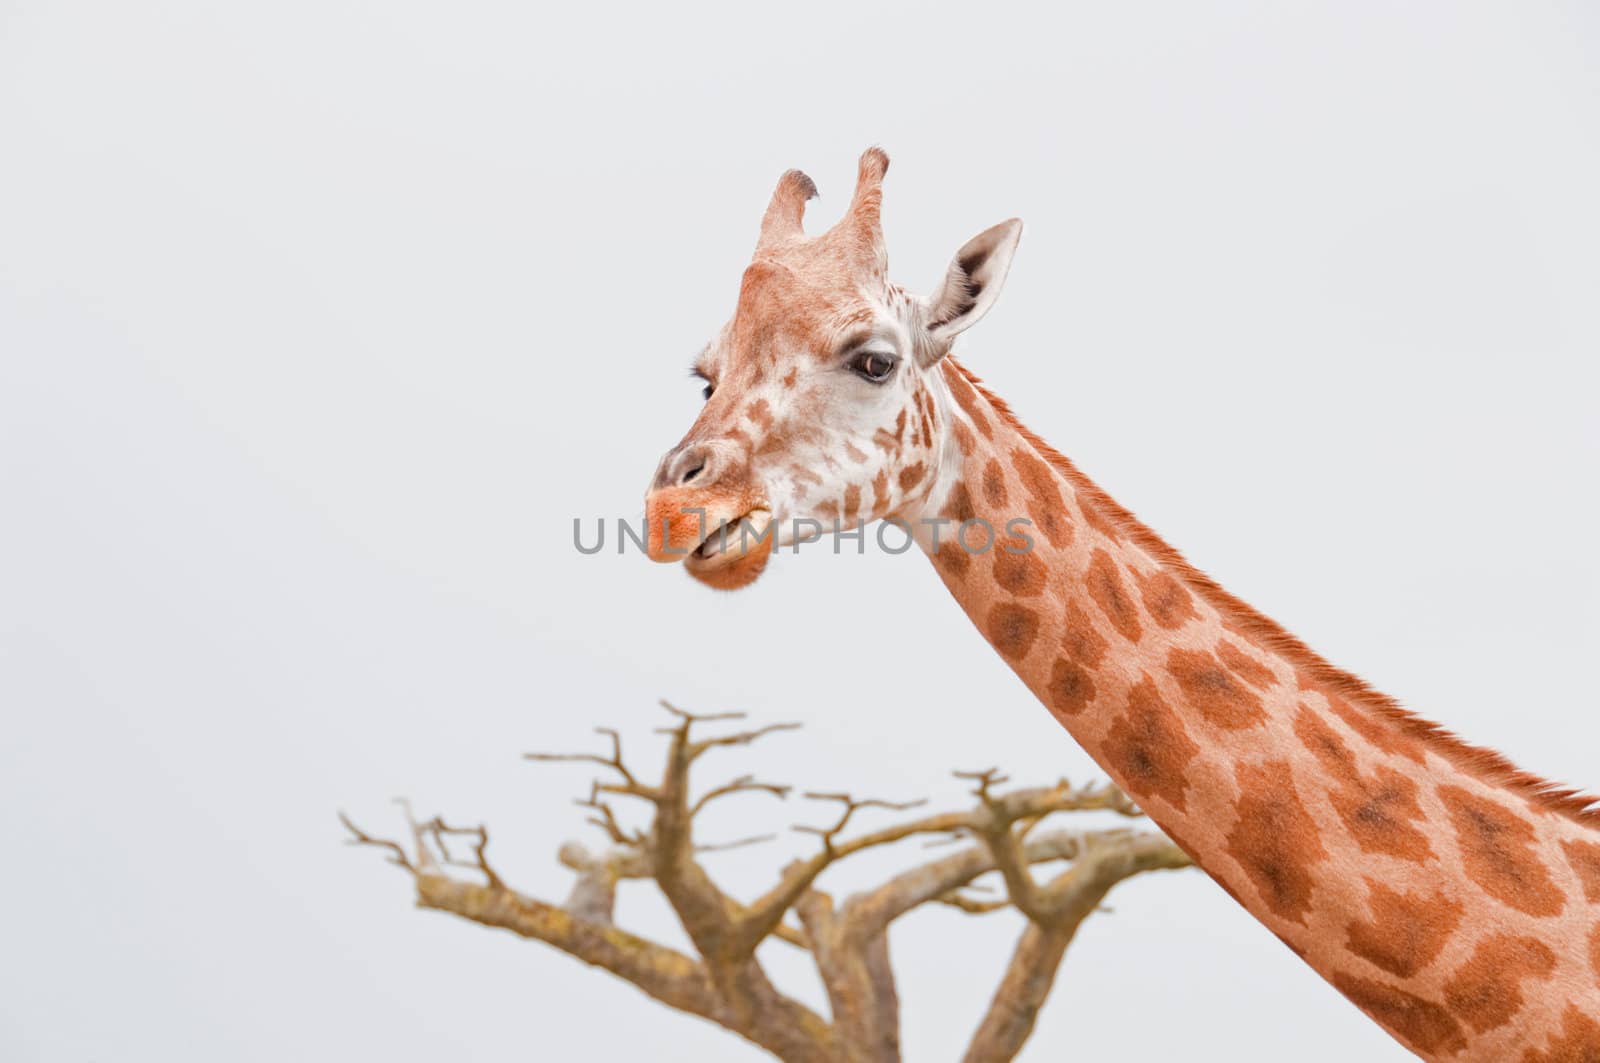 Neck and head of a giraffe with a tree in the background